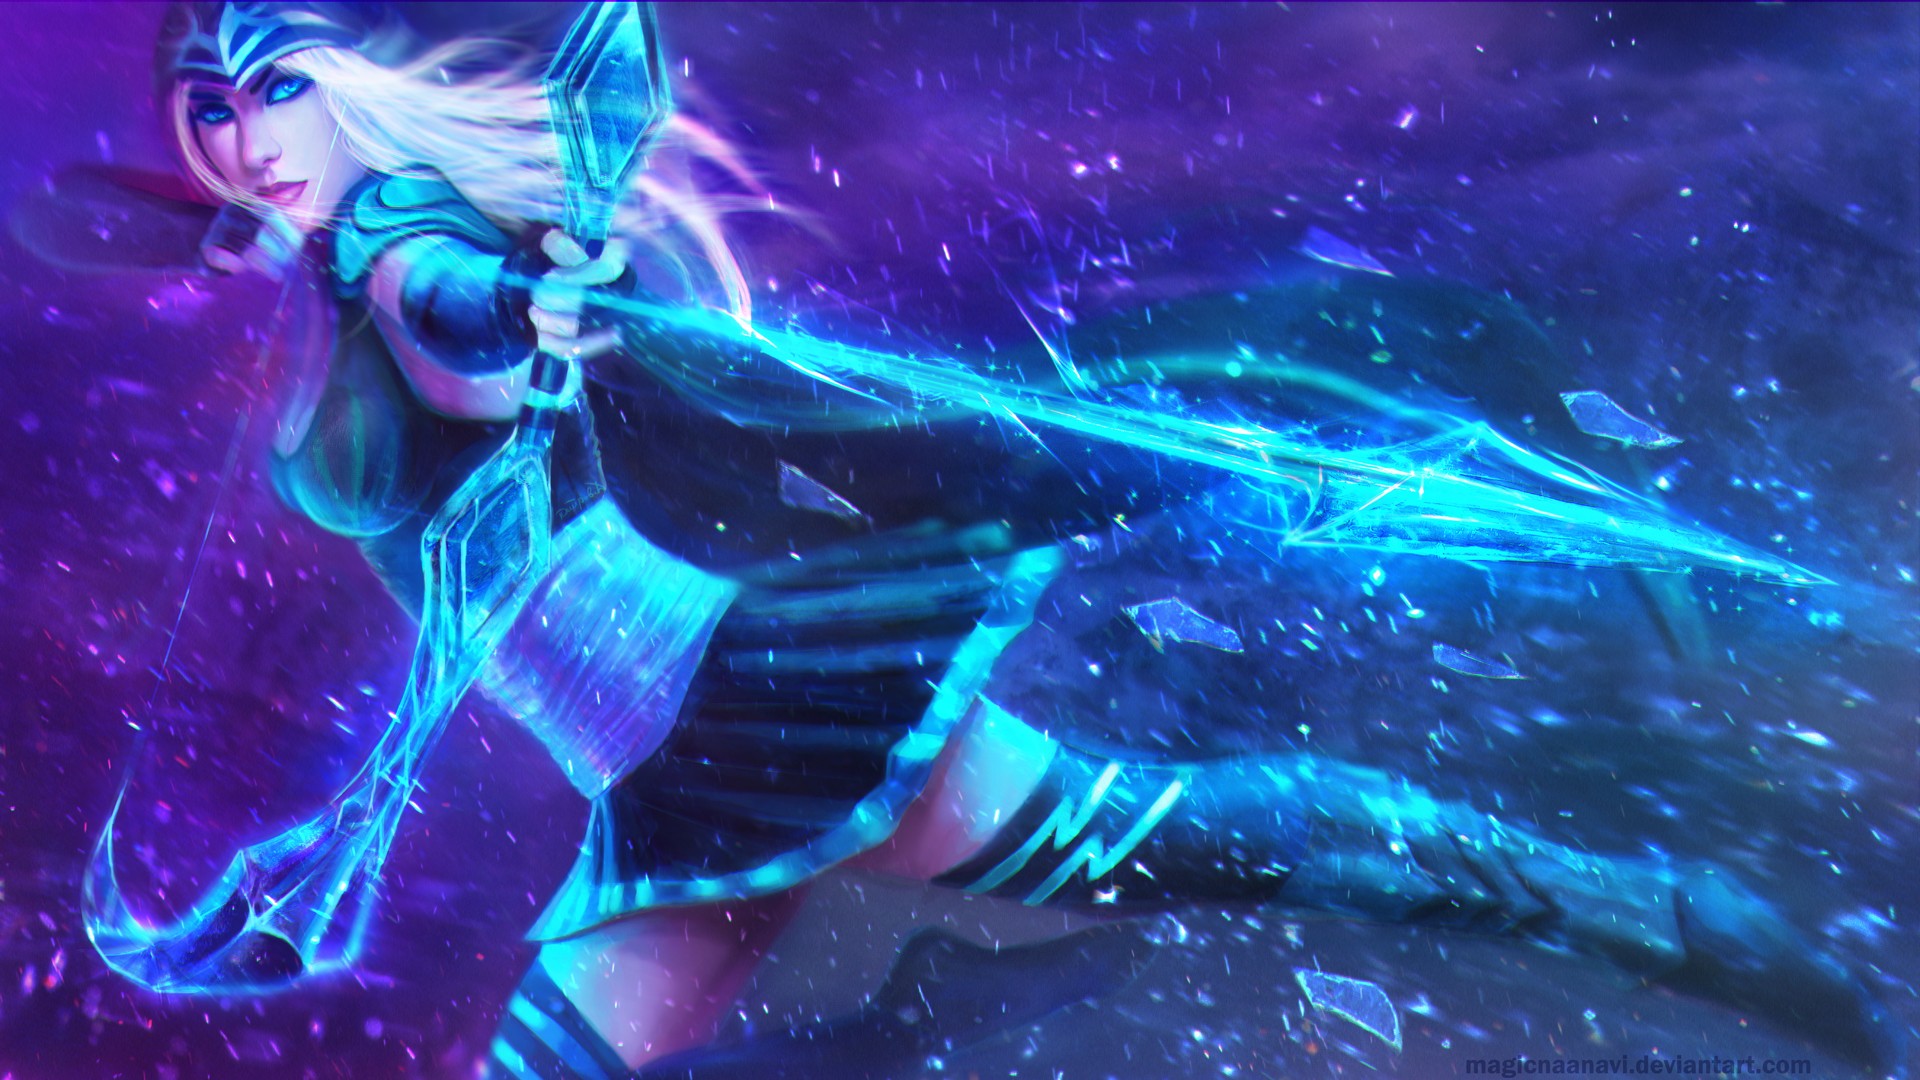 Anime Girls Anime Realistic Render League Of Legends Ashe MagicnaAnavi Bow And Arrow Short Skirt Vid 1920x1080